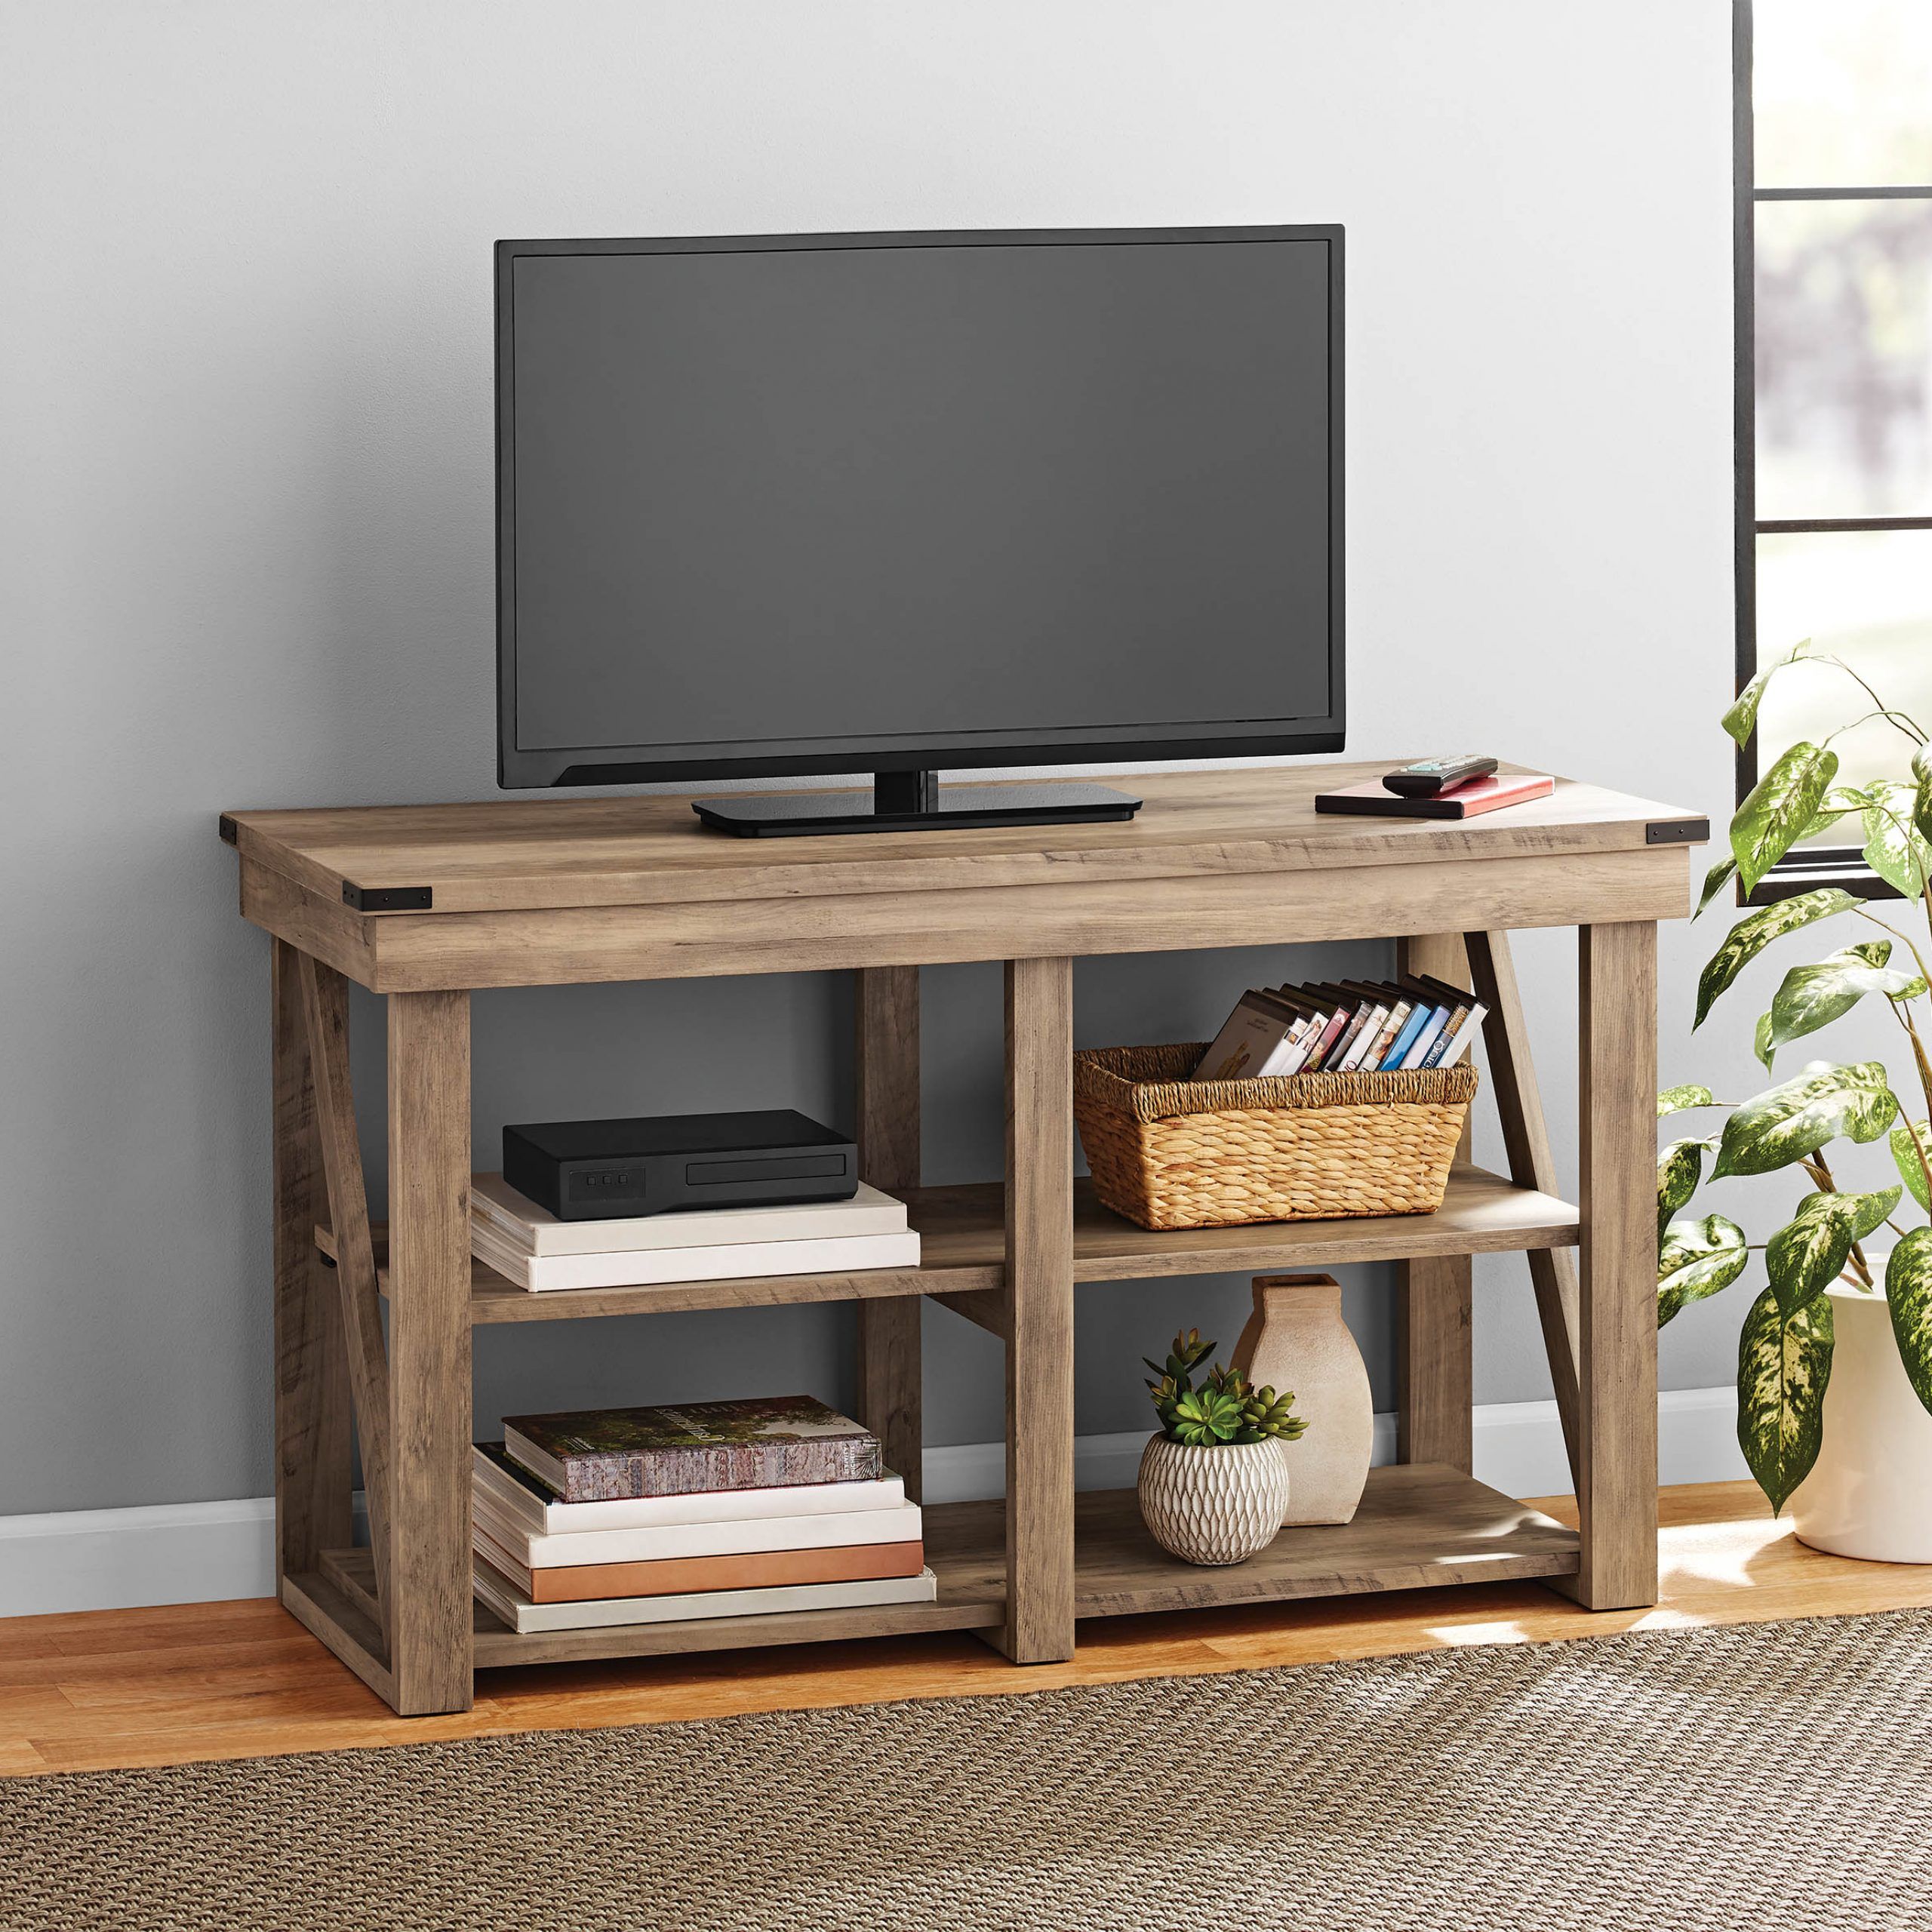 Sahika Tv Stands For Tvs Up To 55" Inside Recent Mainstays Lawson Tv Stand For Tvs Up To 55", Rustic Oak (View 2 of 25)